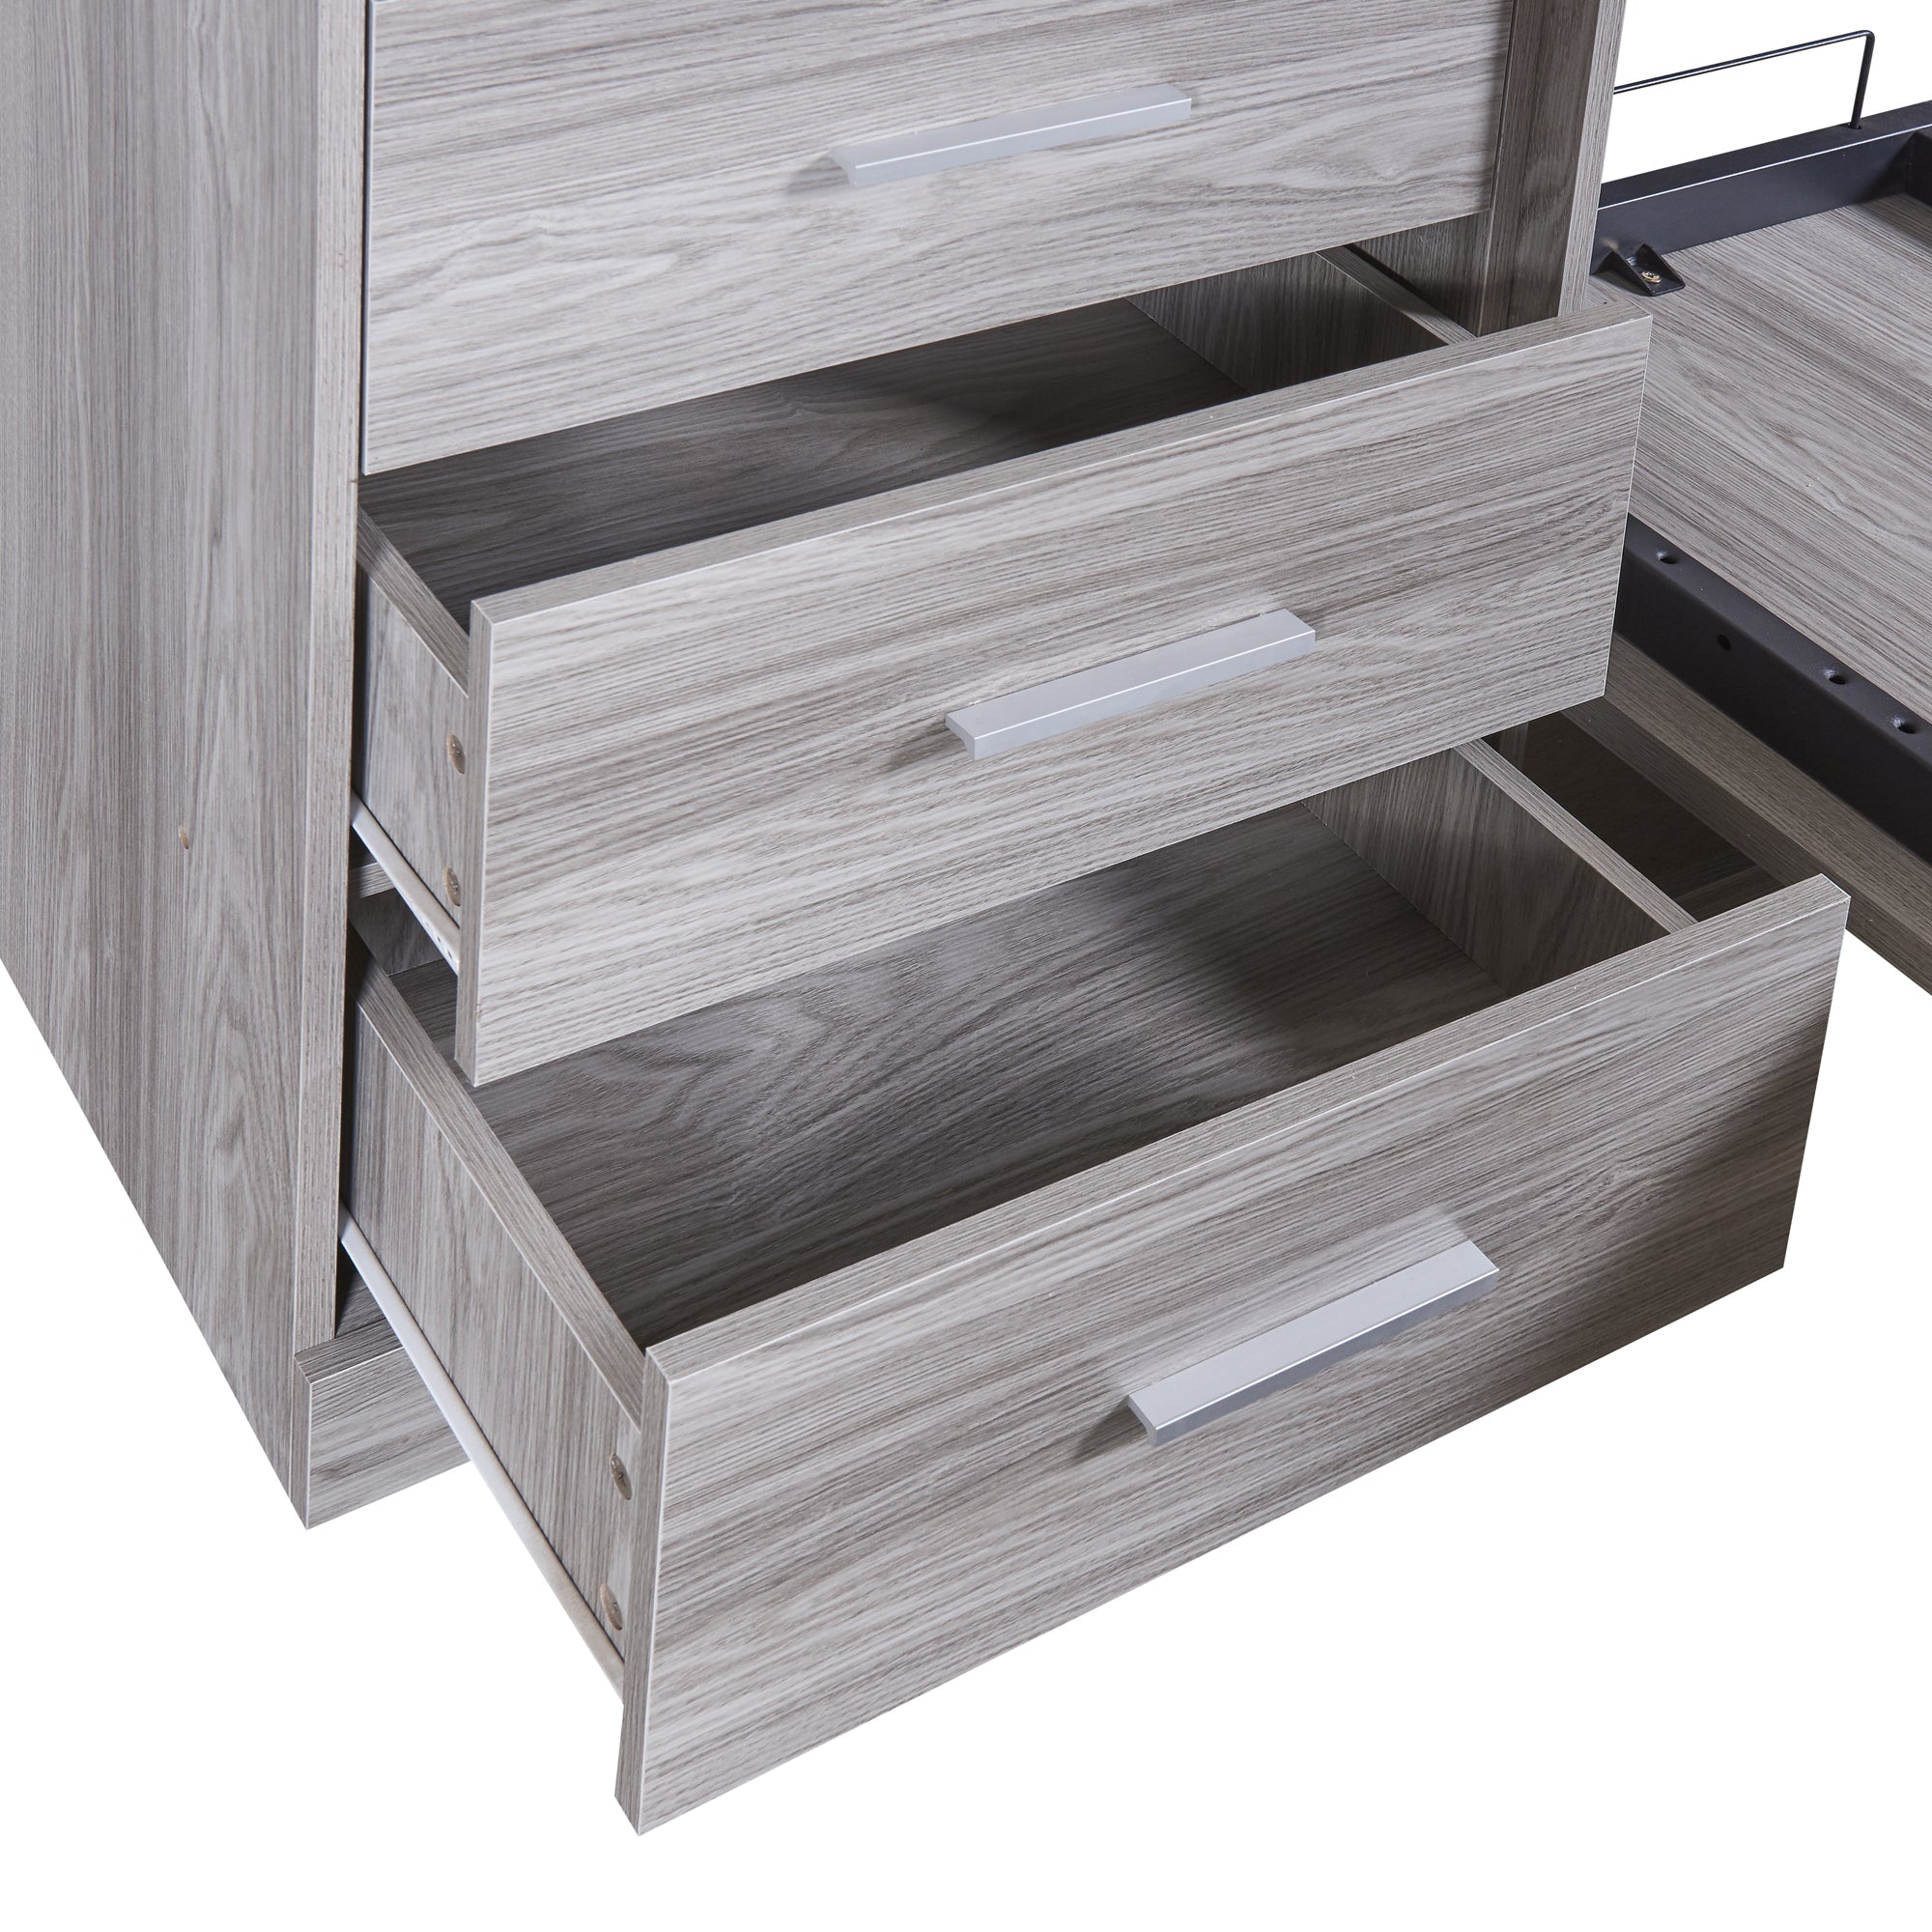 Bellemave® Murphy Bed with Storage Shelves and Drawers Bellemave®